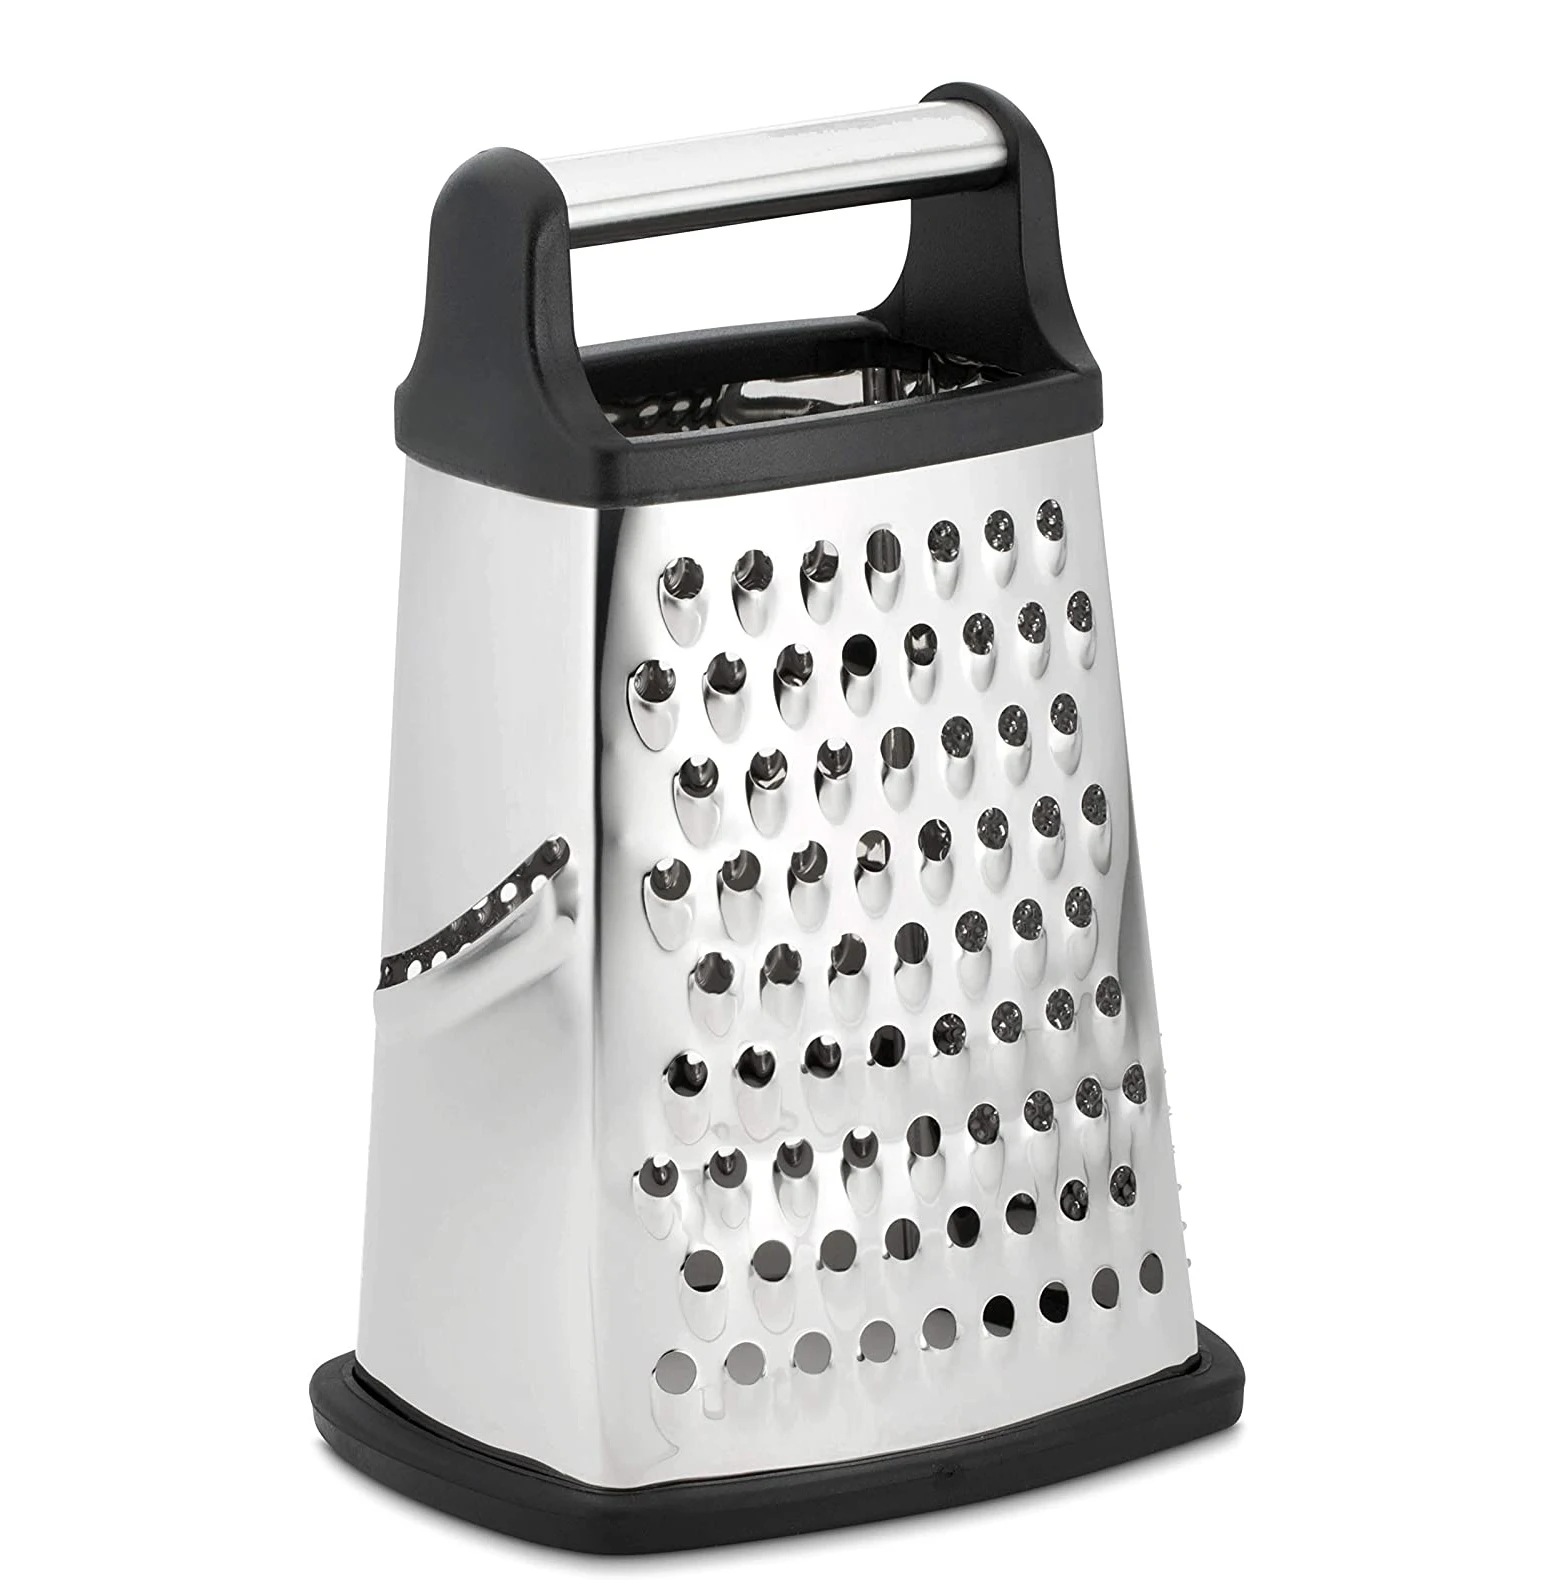 Kitchen Tool Cheese Grater Stainless Steel 4-Sided Vegetables Fruit Grinder